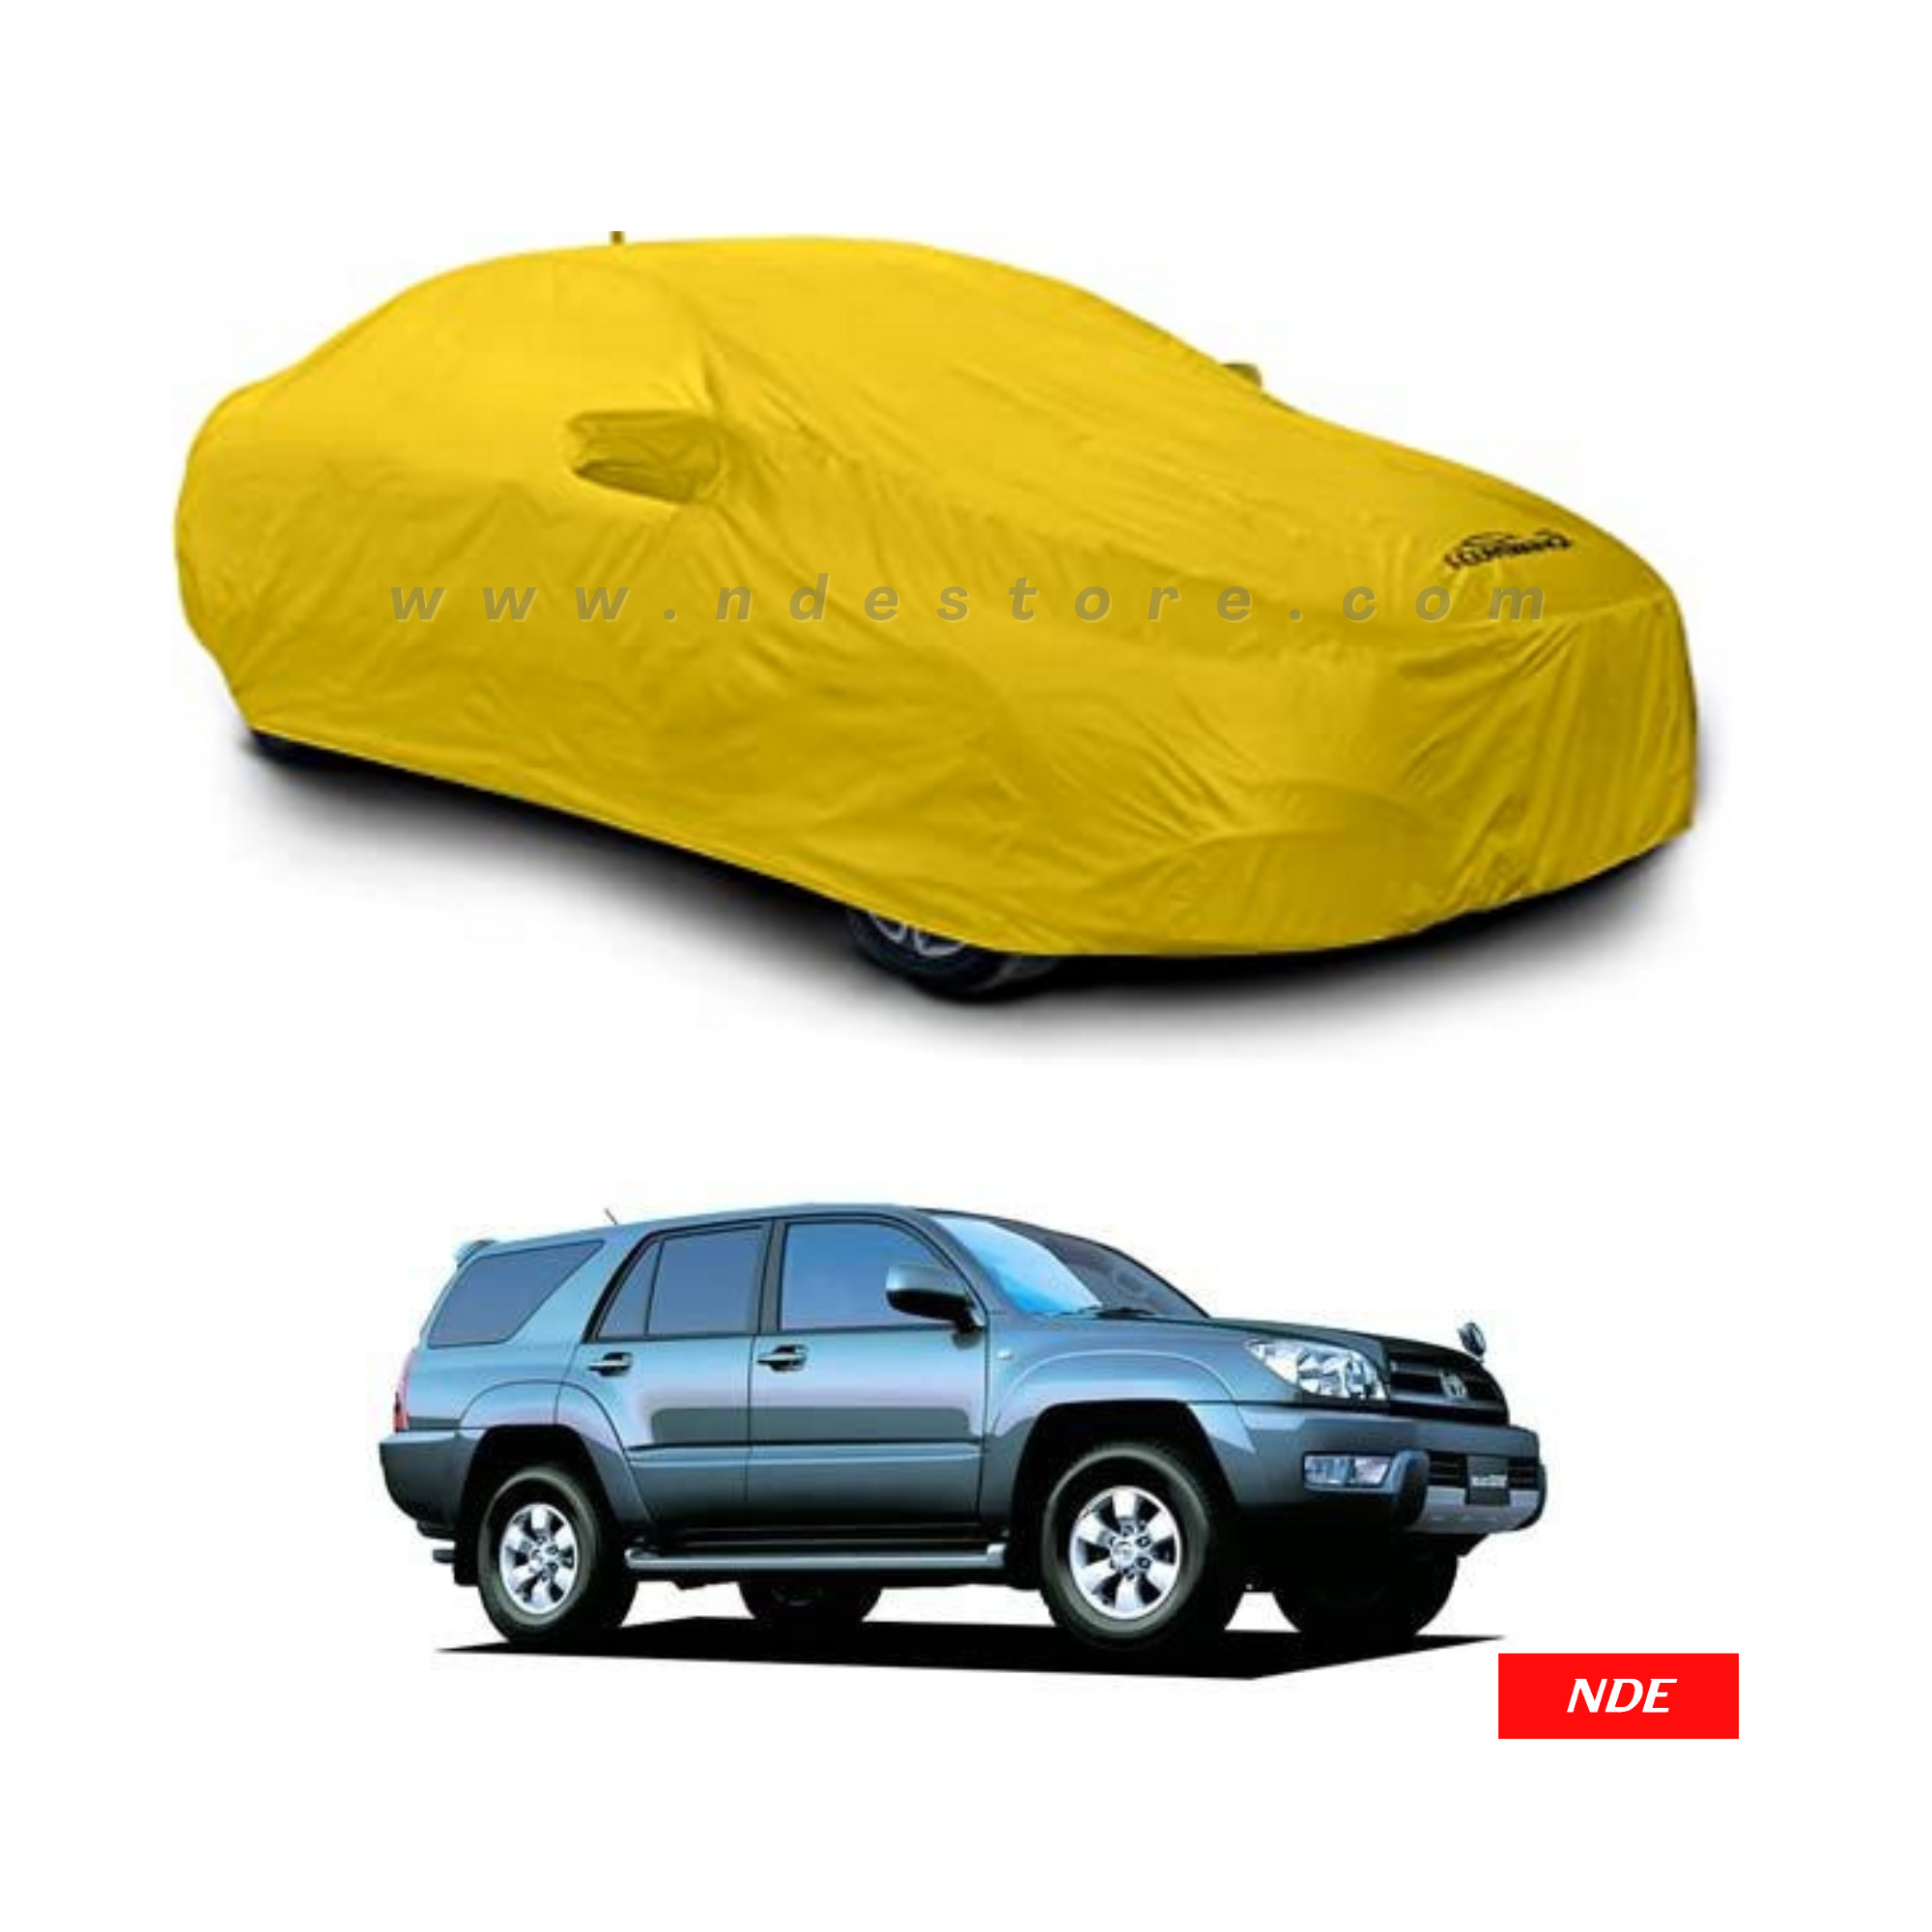 TOP COVER PREMIUM QUALITY MICROFIBER TOWEL FOR TOYOTA HILUX SURF (ALL MODELS)